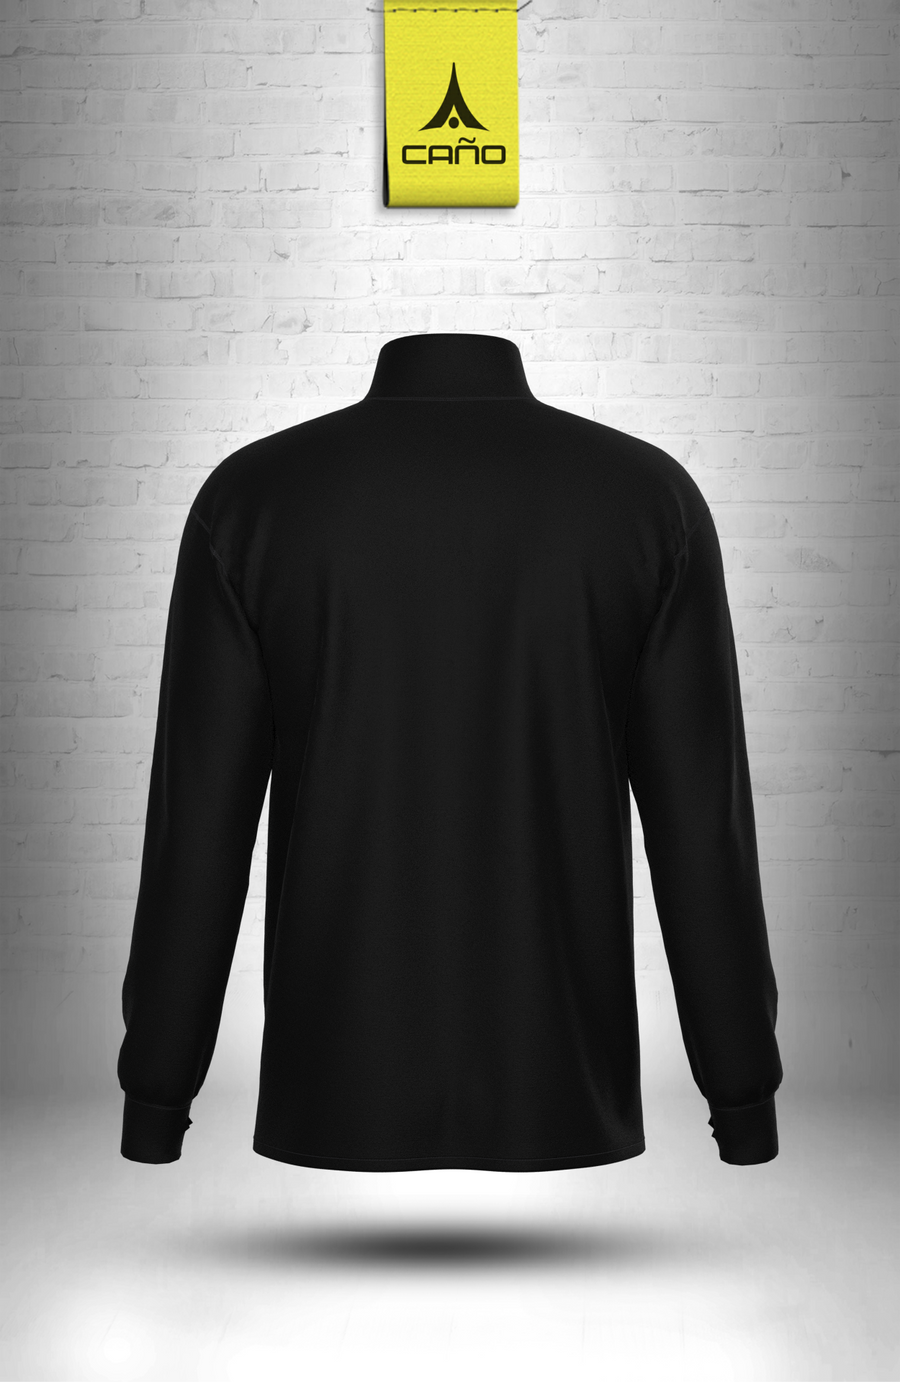 $40.00 - Caño Men’s Full Zip 4 Way Stretch High Quality Yoga Material Jacket (Fitted)